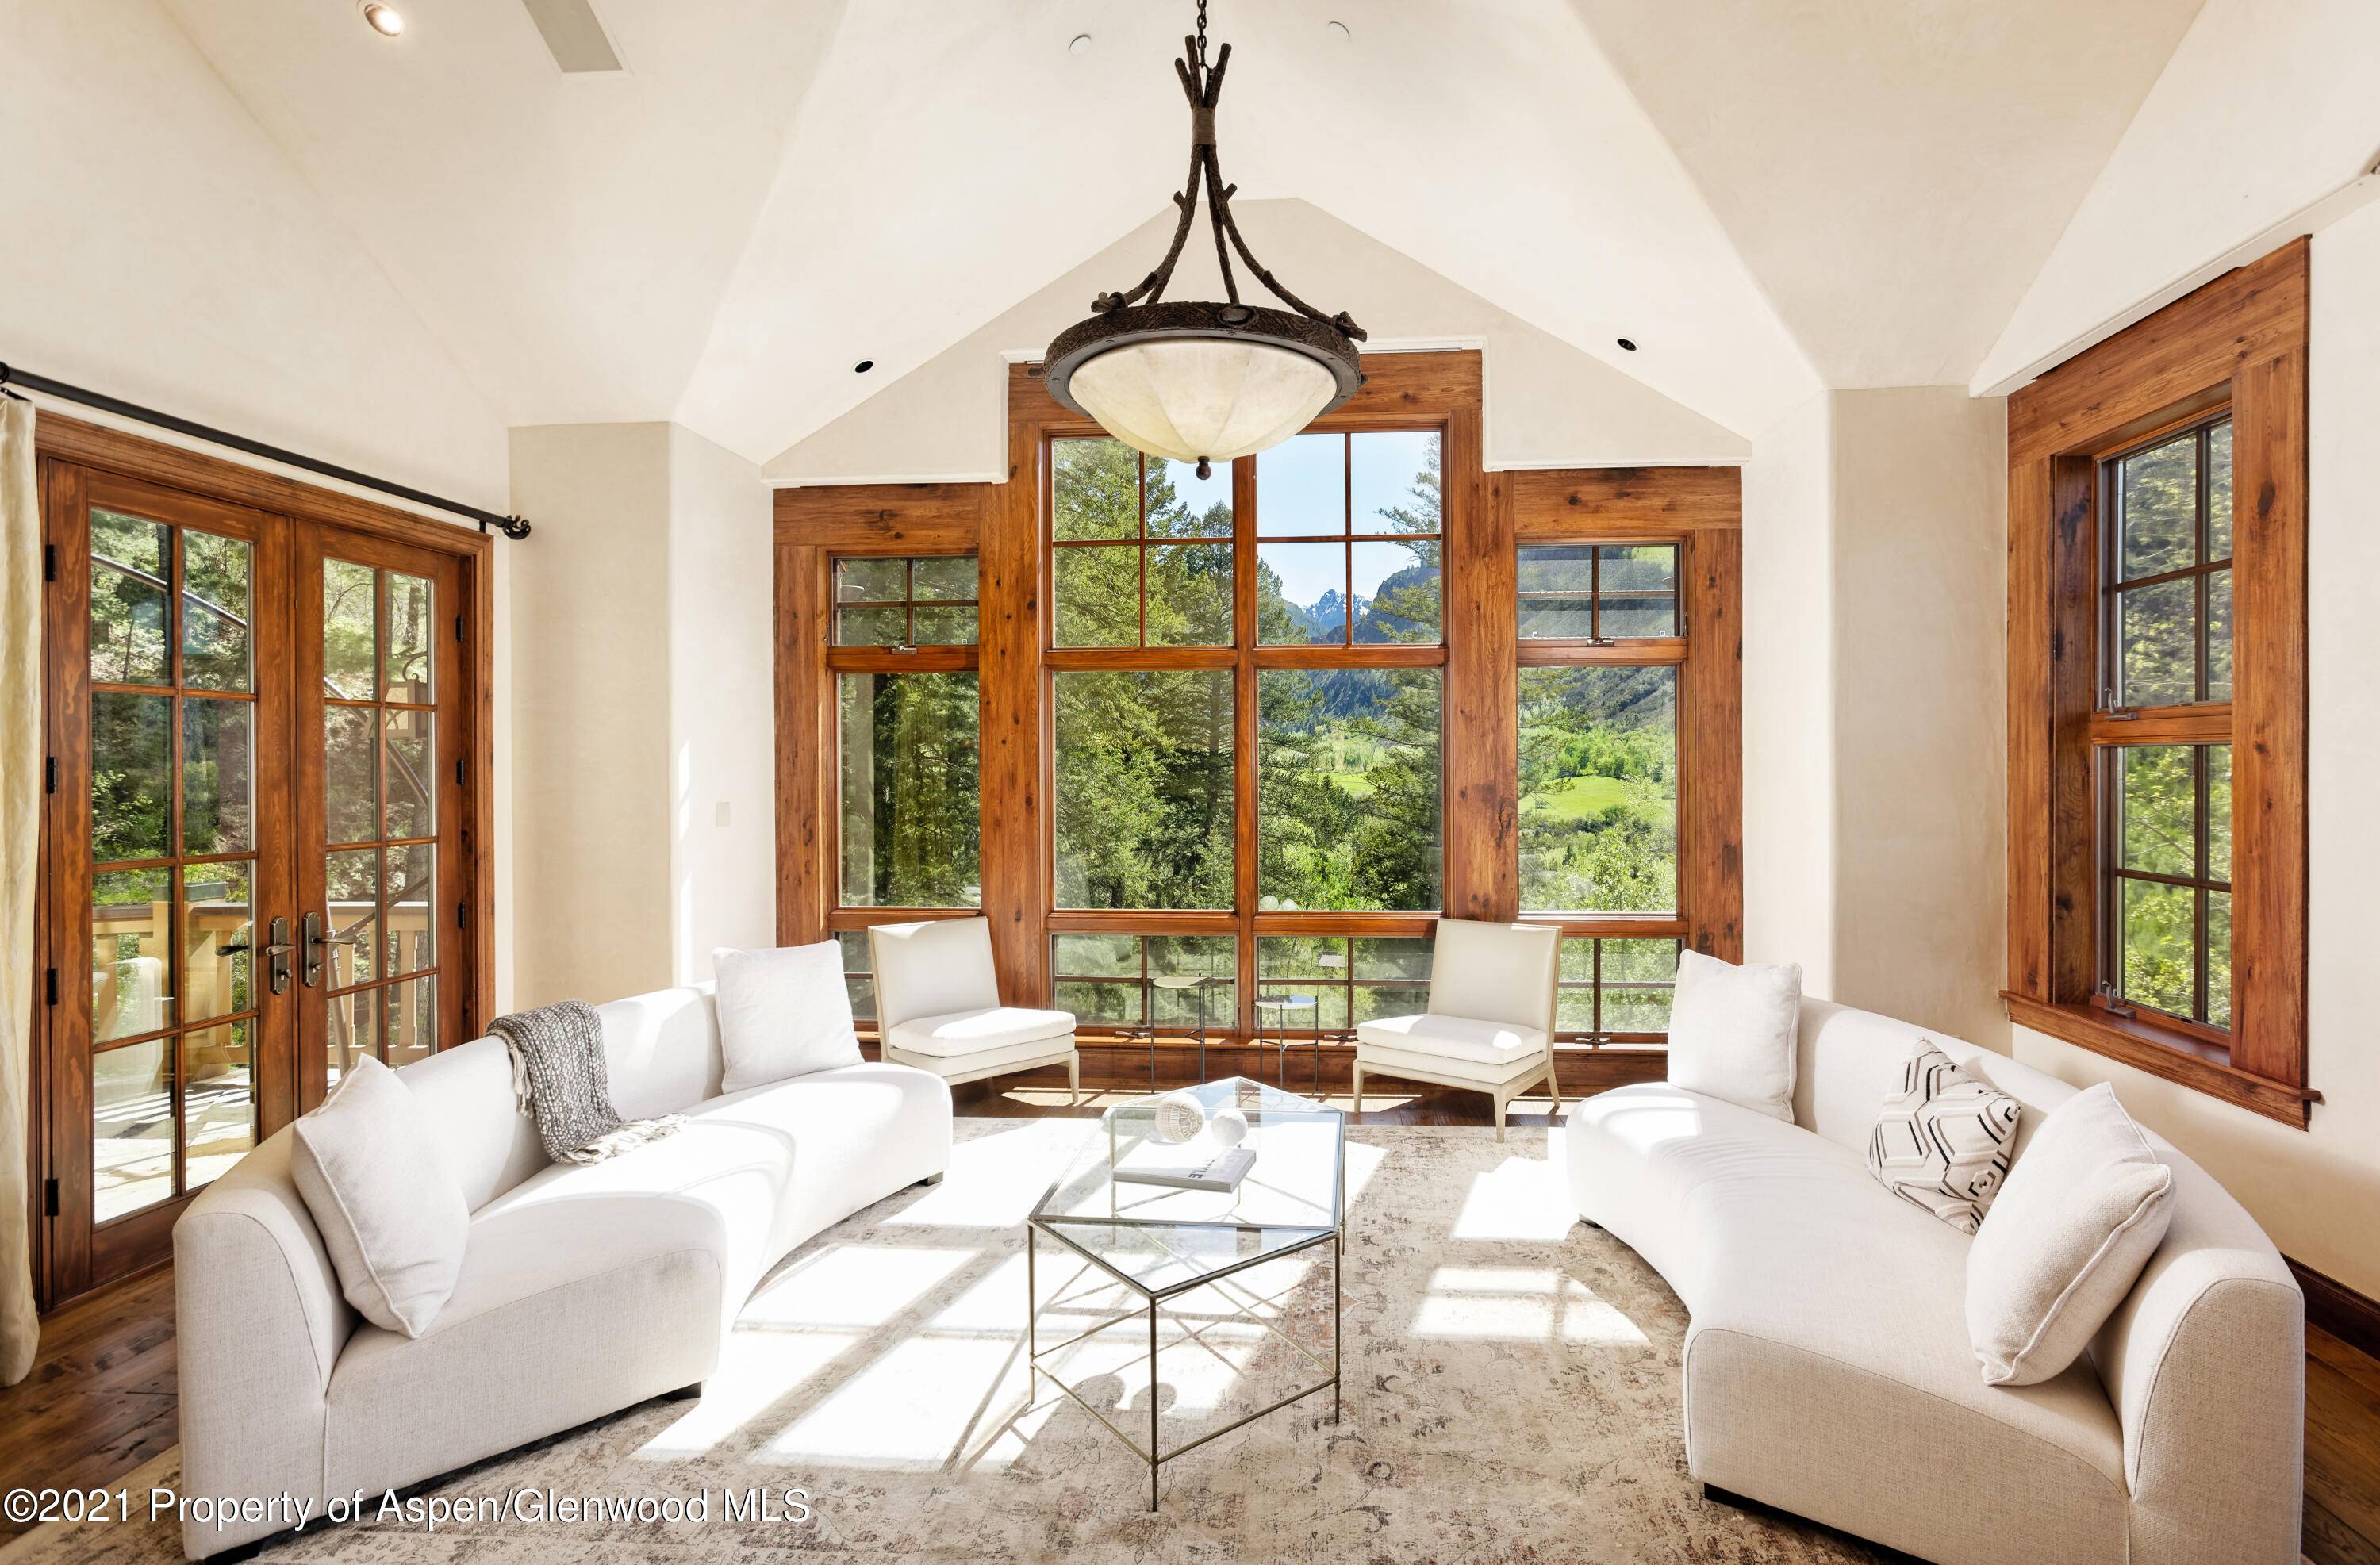 Enjoy the quintessential Aspen vacation from this well appointed and newly furnished Aspen Highlands retreat.